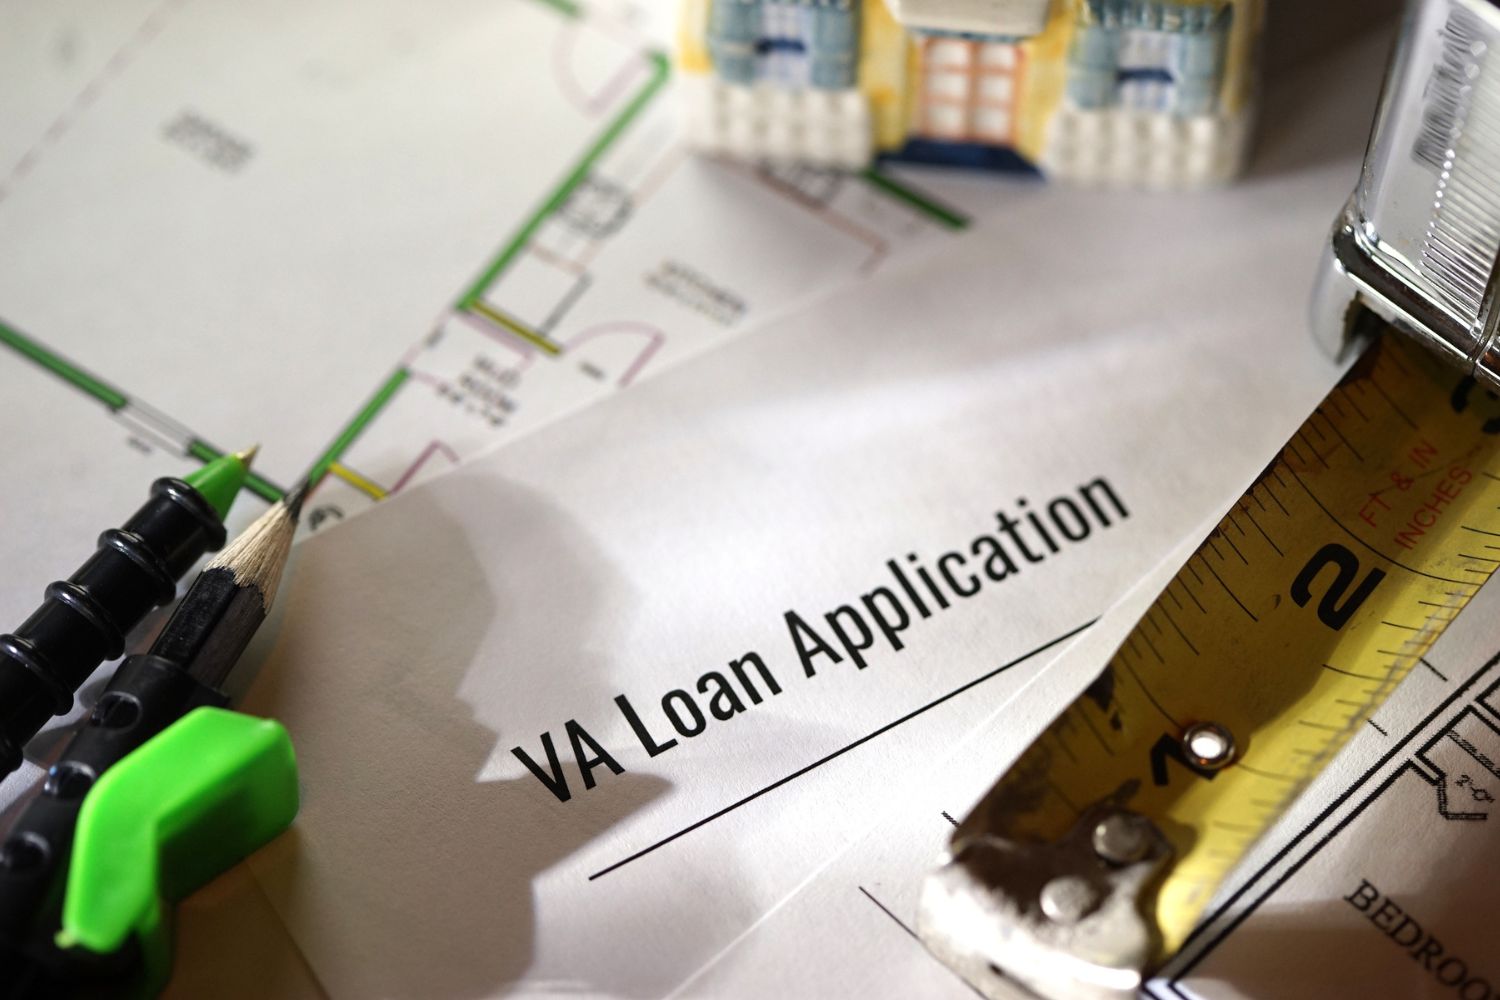 How to Get a Va Loan